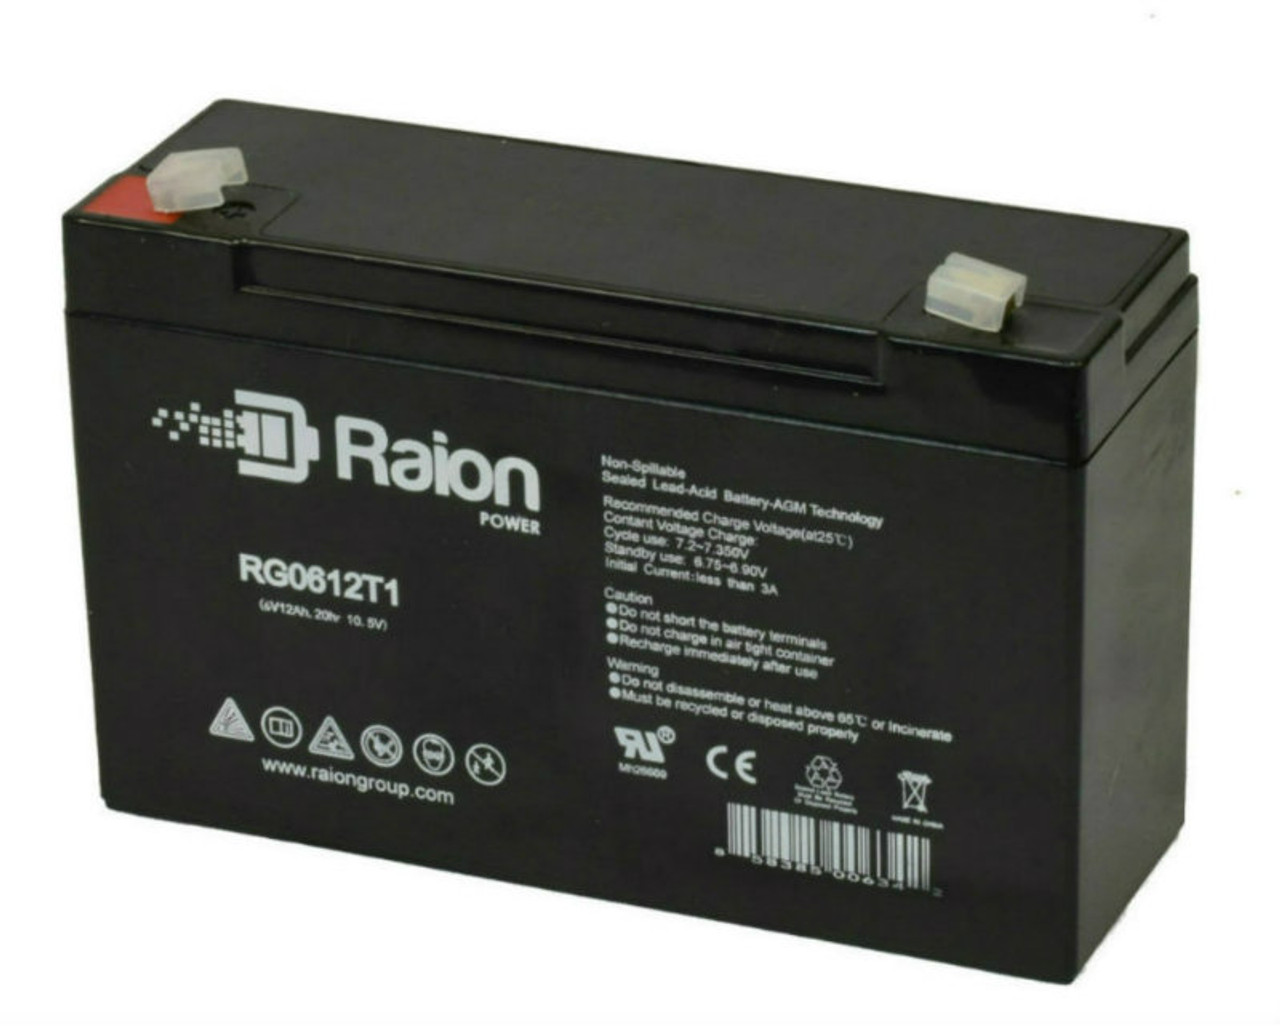 Raion Power RG06120T1 Replacement 6V 12Ah Emergency Light Battery for Holophane 90835-a